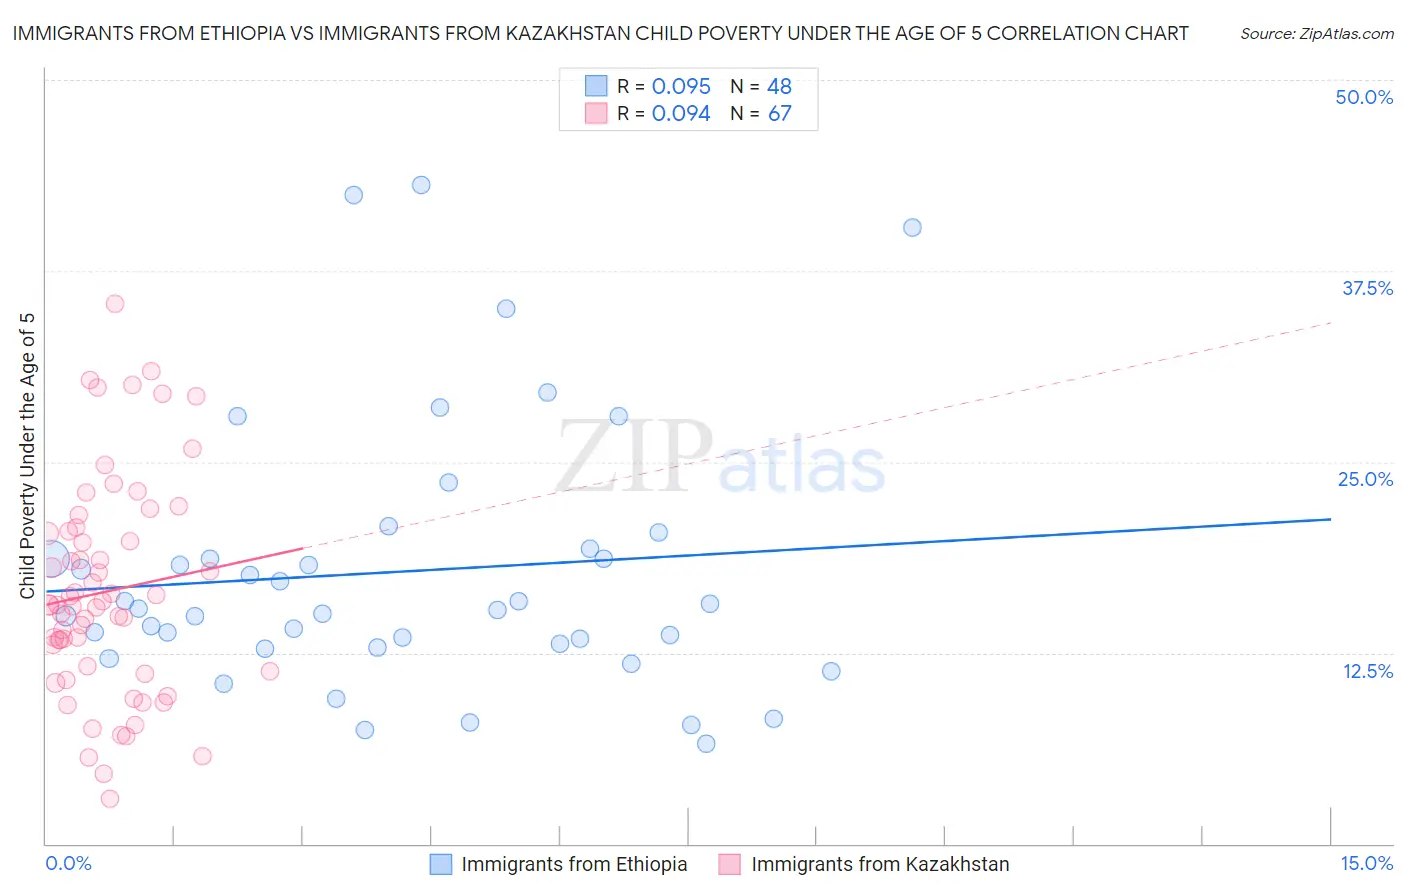 Immigrants from Ethiopia vs Immigrants from Kazakhstan Child Poverty Under the Age of 5